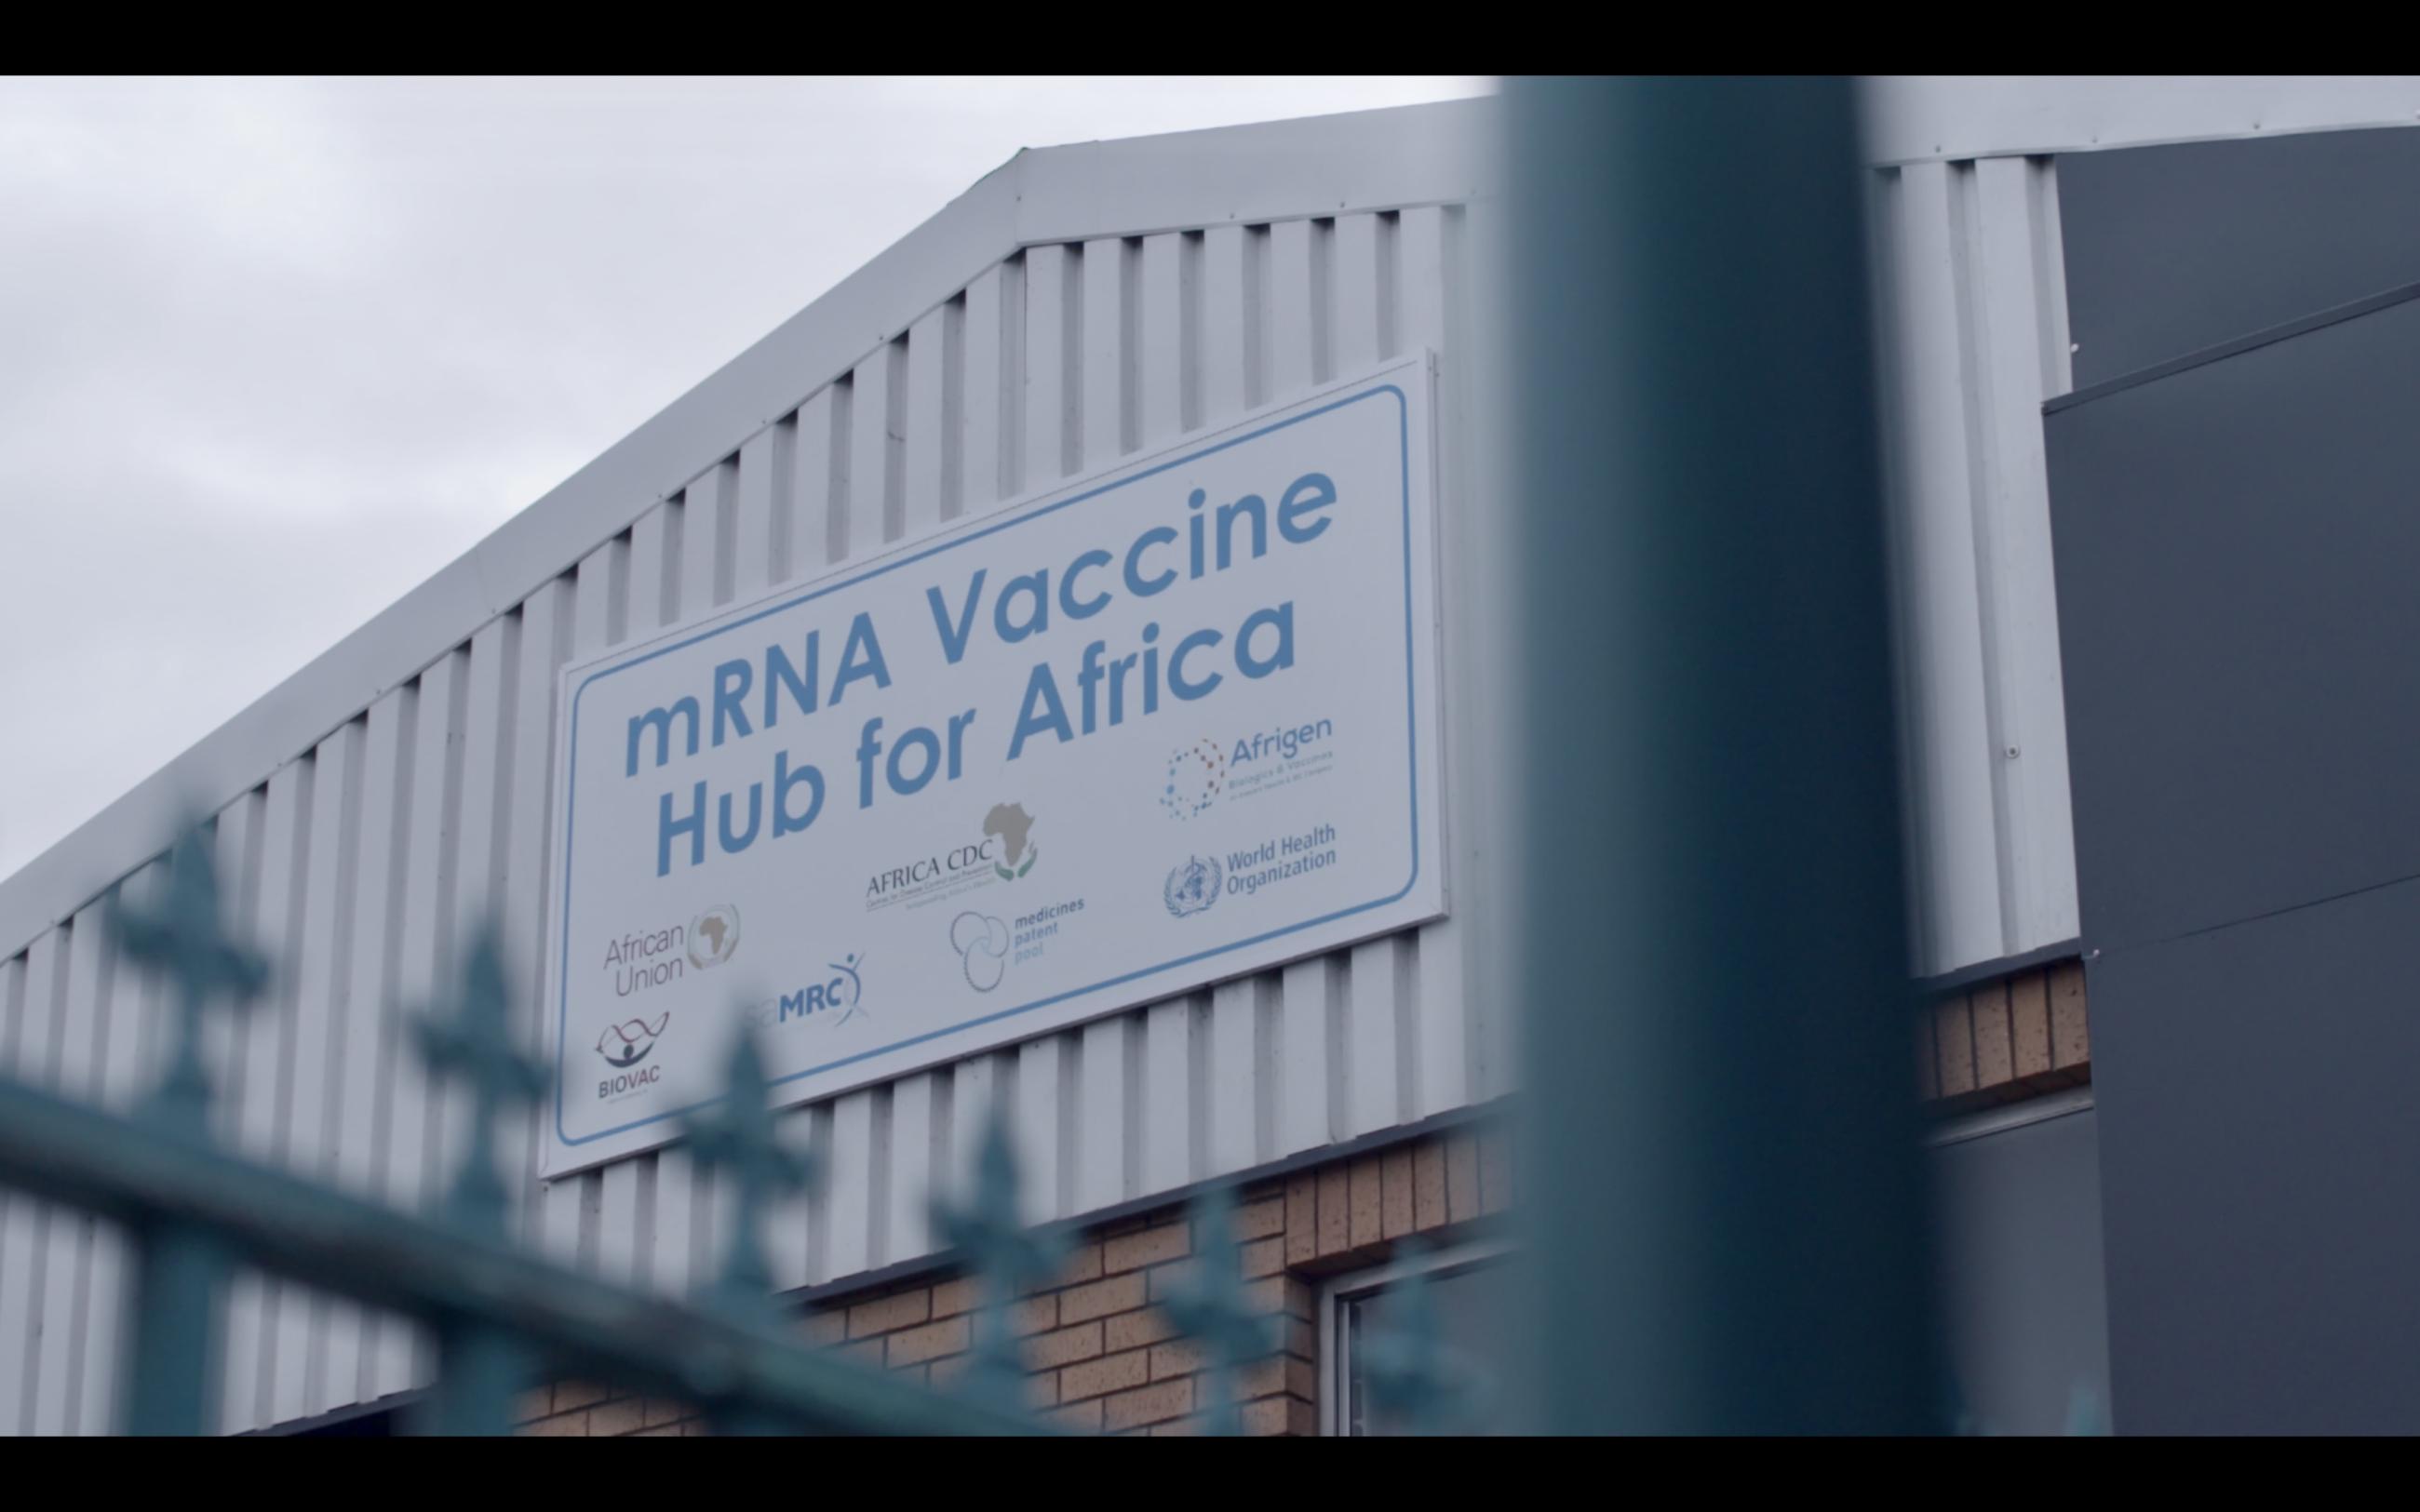 The side of an industrial looking building features a sign that says, "mRNA Vaccine Hub for Africa." On the bottom of the sign are the names of "hub" partners and their logos, including the African Union, Africa CDC, Afrigen, Biovac, MRC, and the World Health Organization.